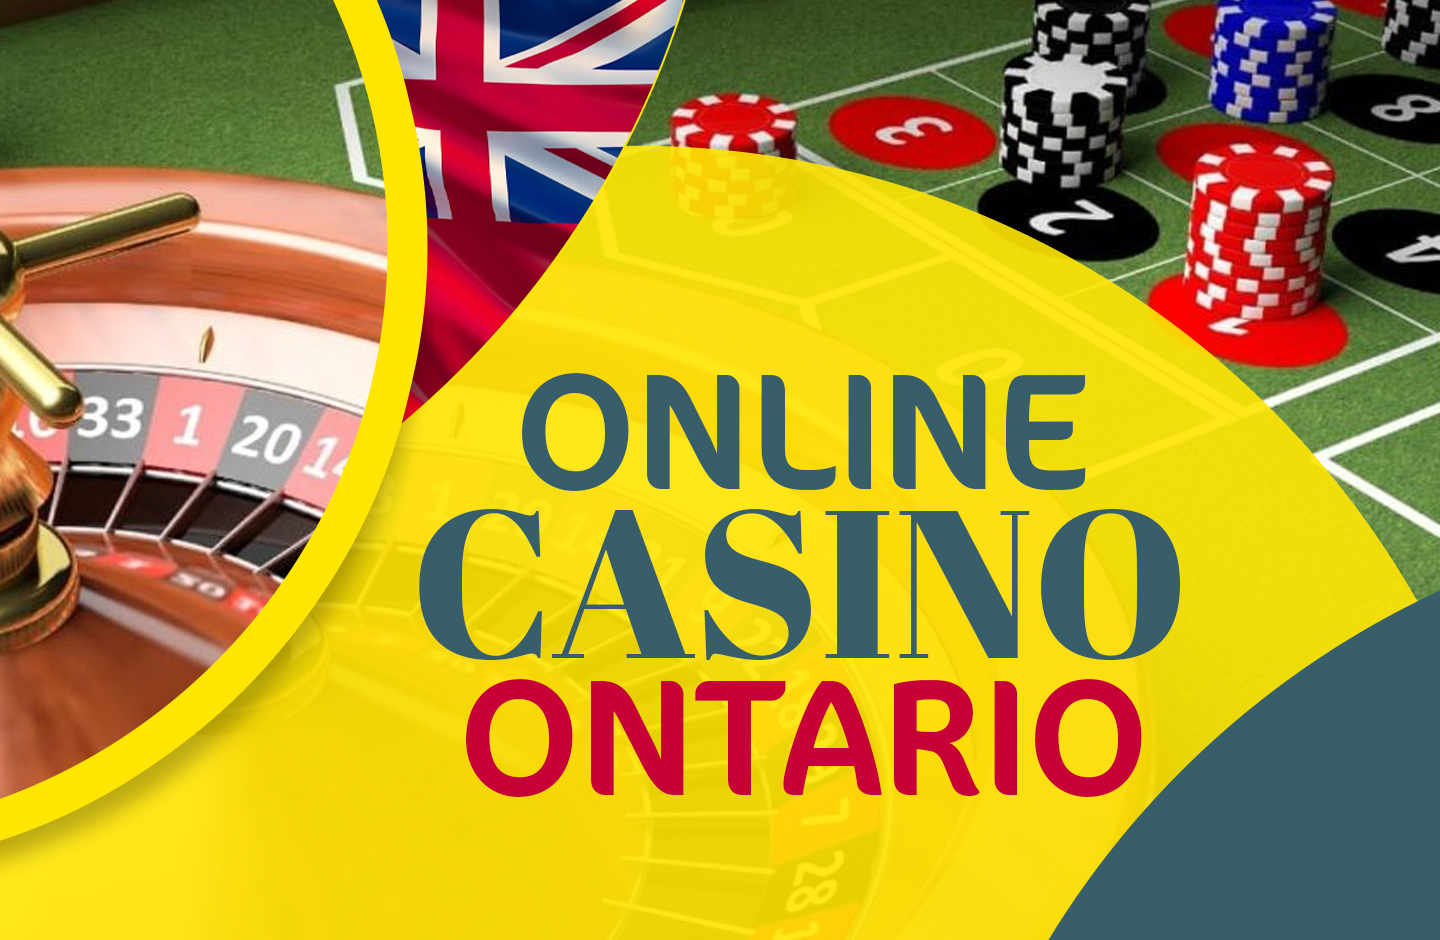 Wondering How To Make Your online casino Cyprus Rock? Read This!